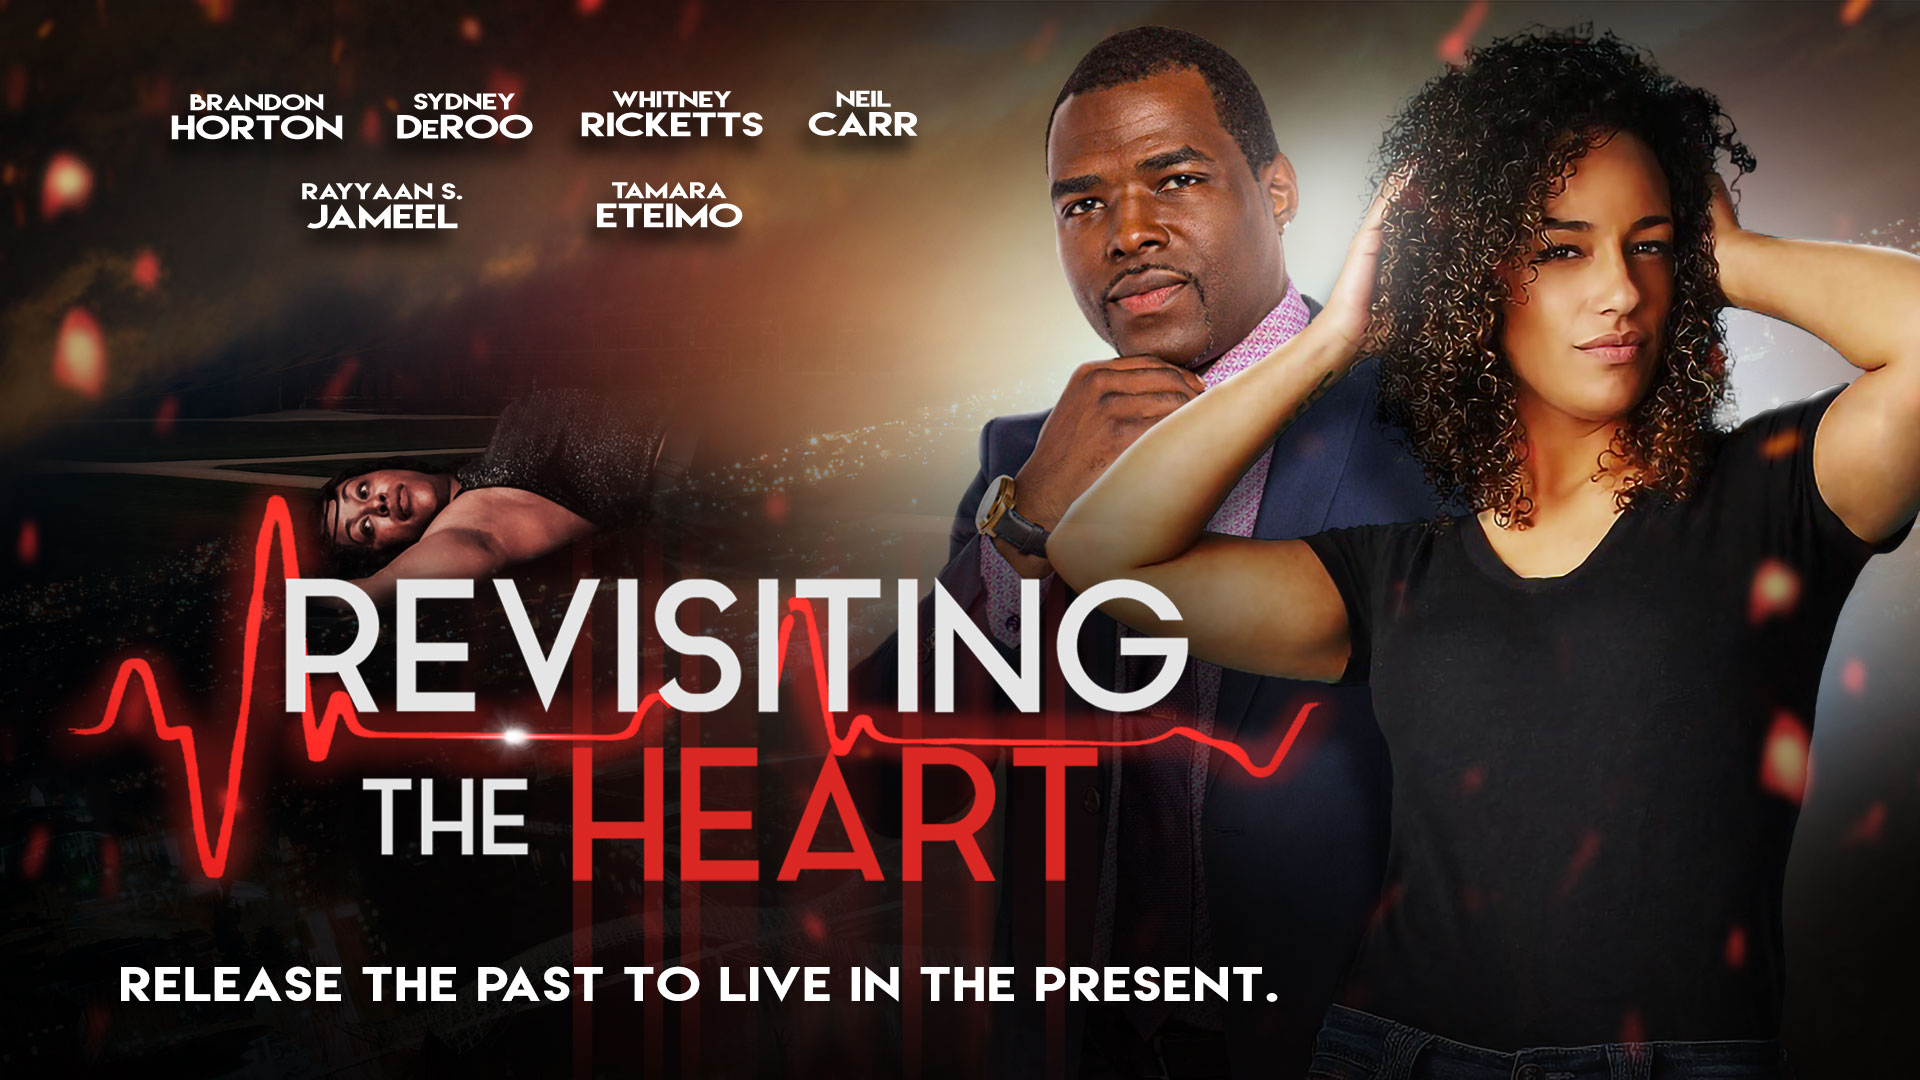 Revisiting The Heart